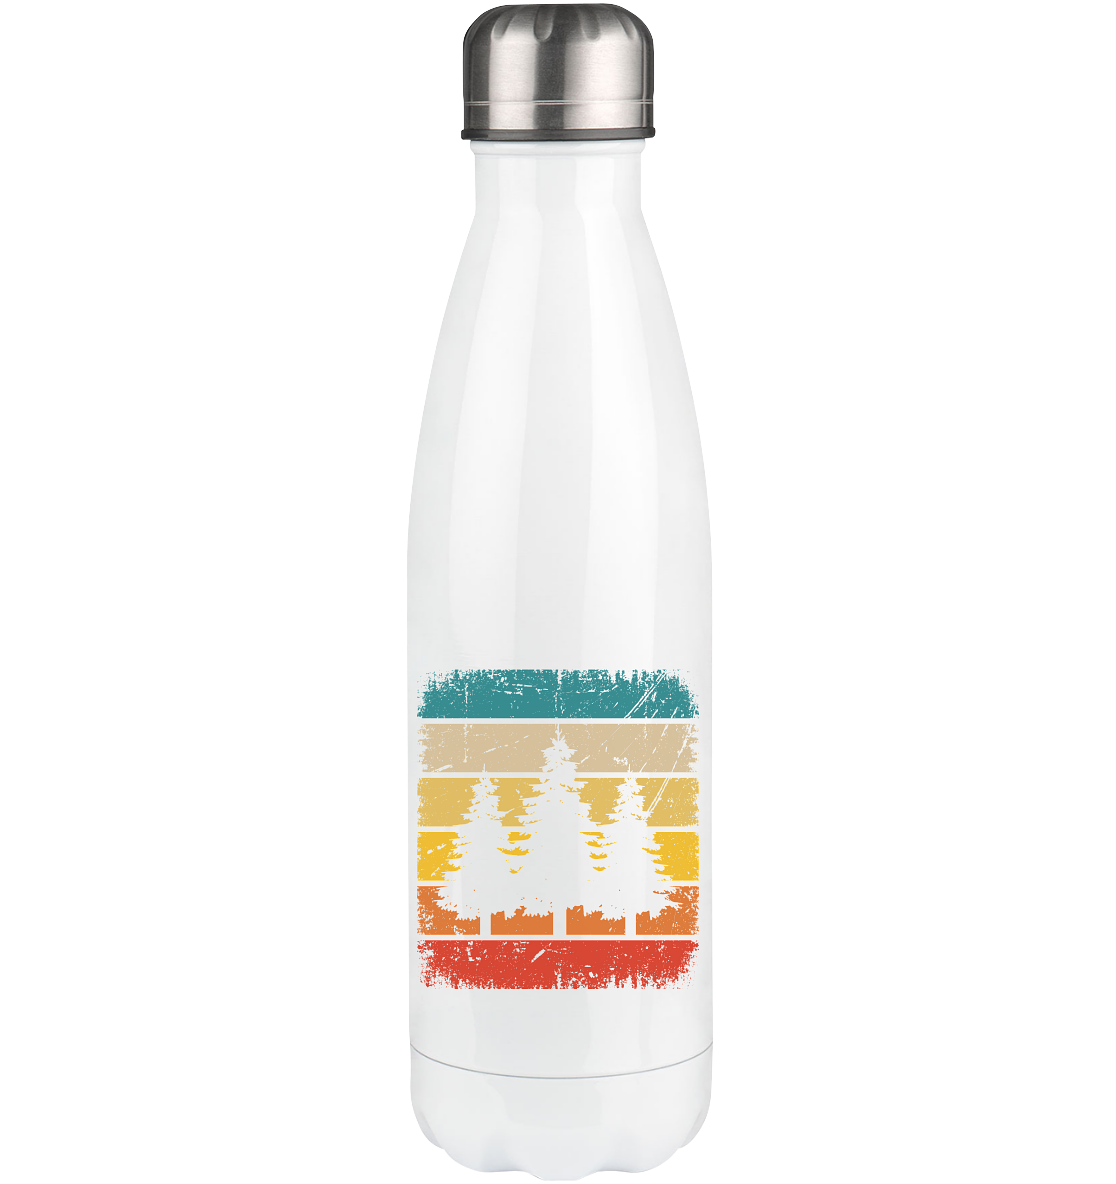 Vintage Square and Trees - Edelstahl Thermosflasche camping UONP 500ml